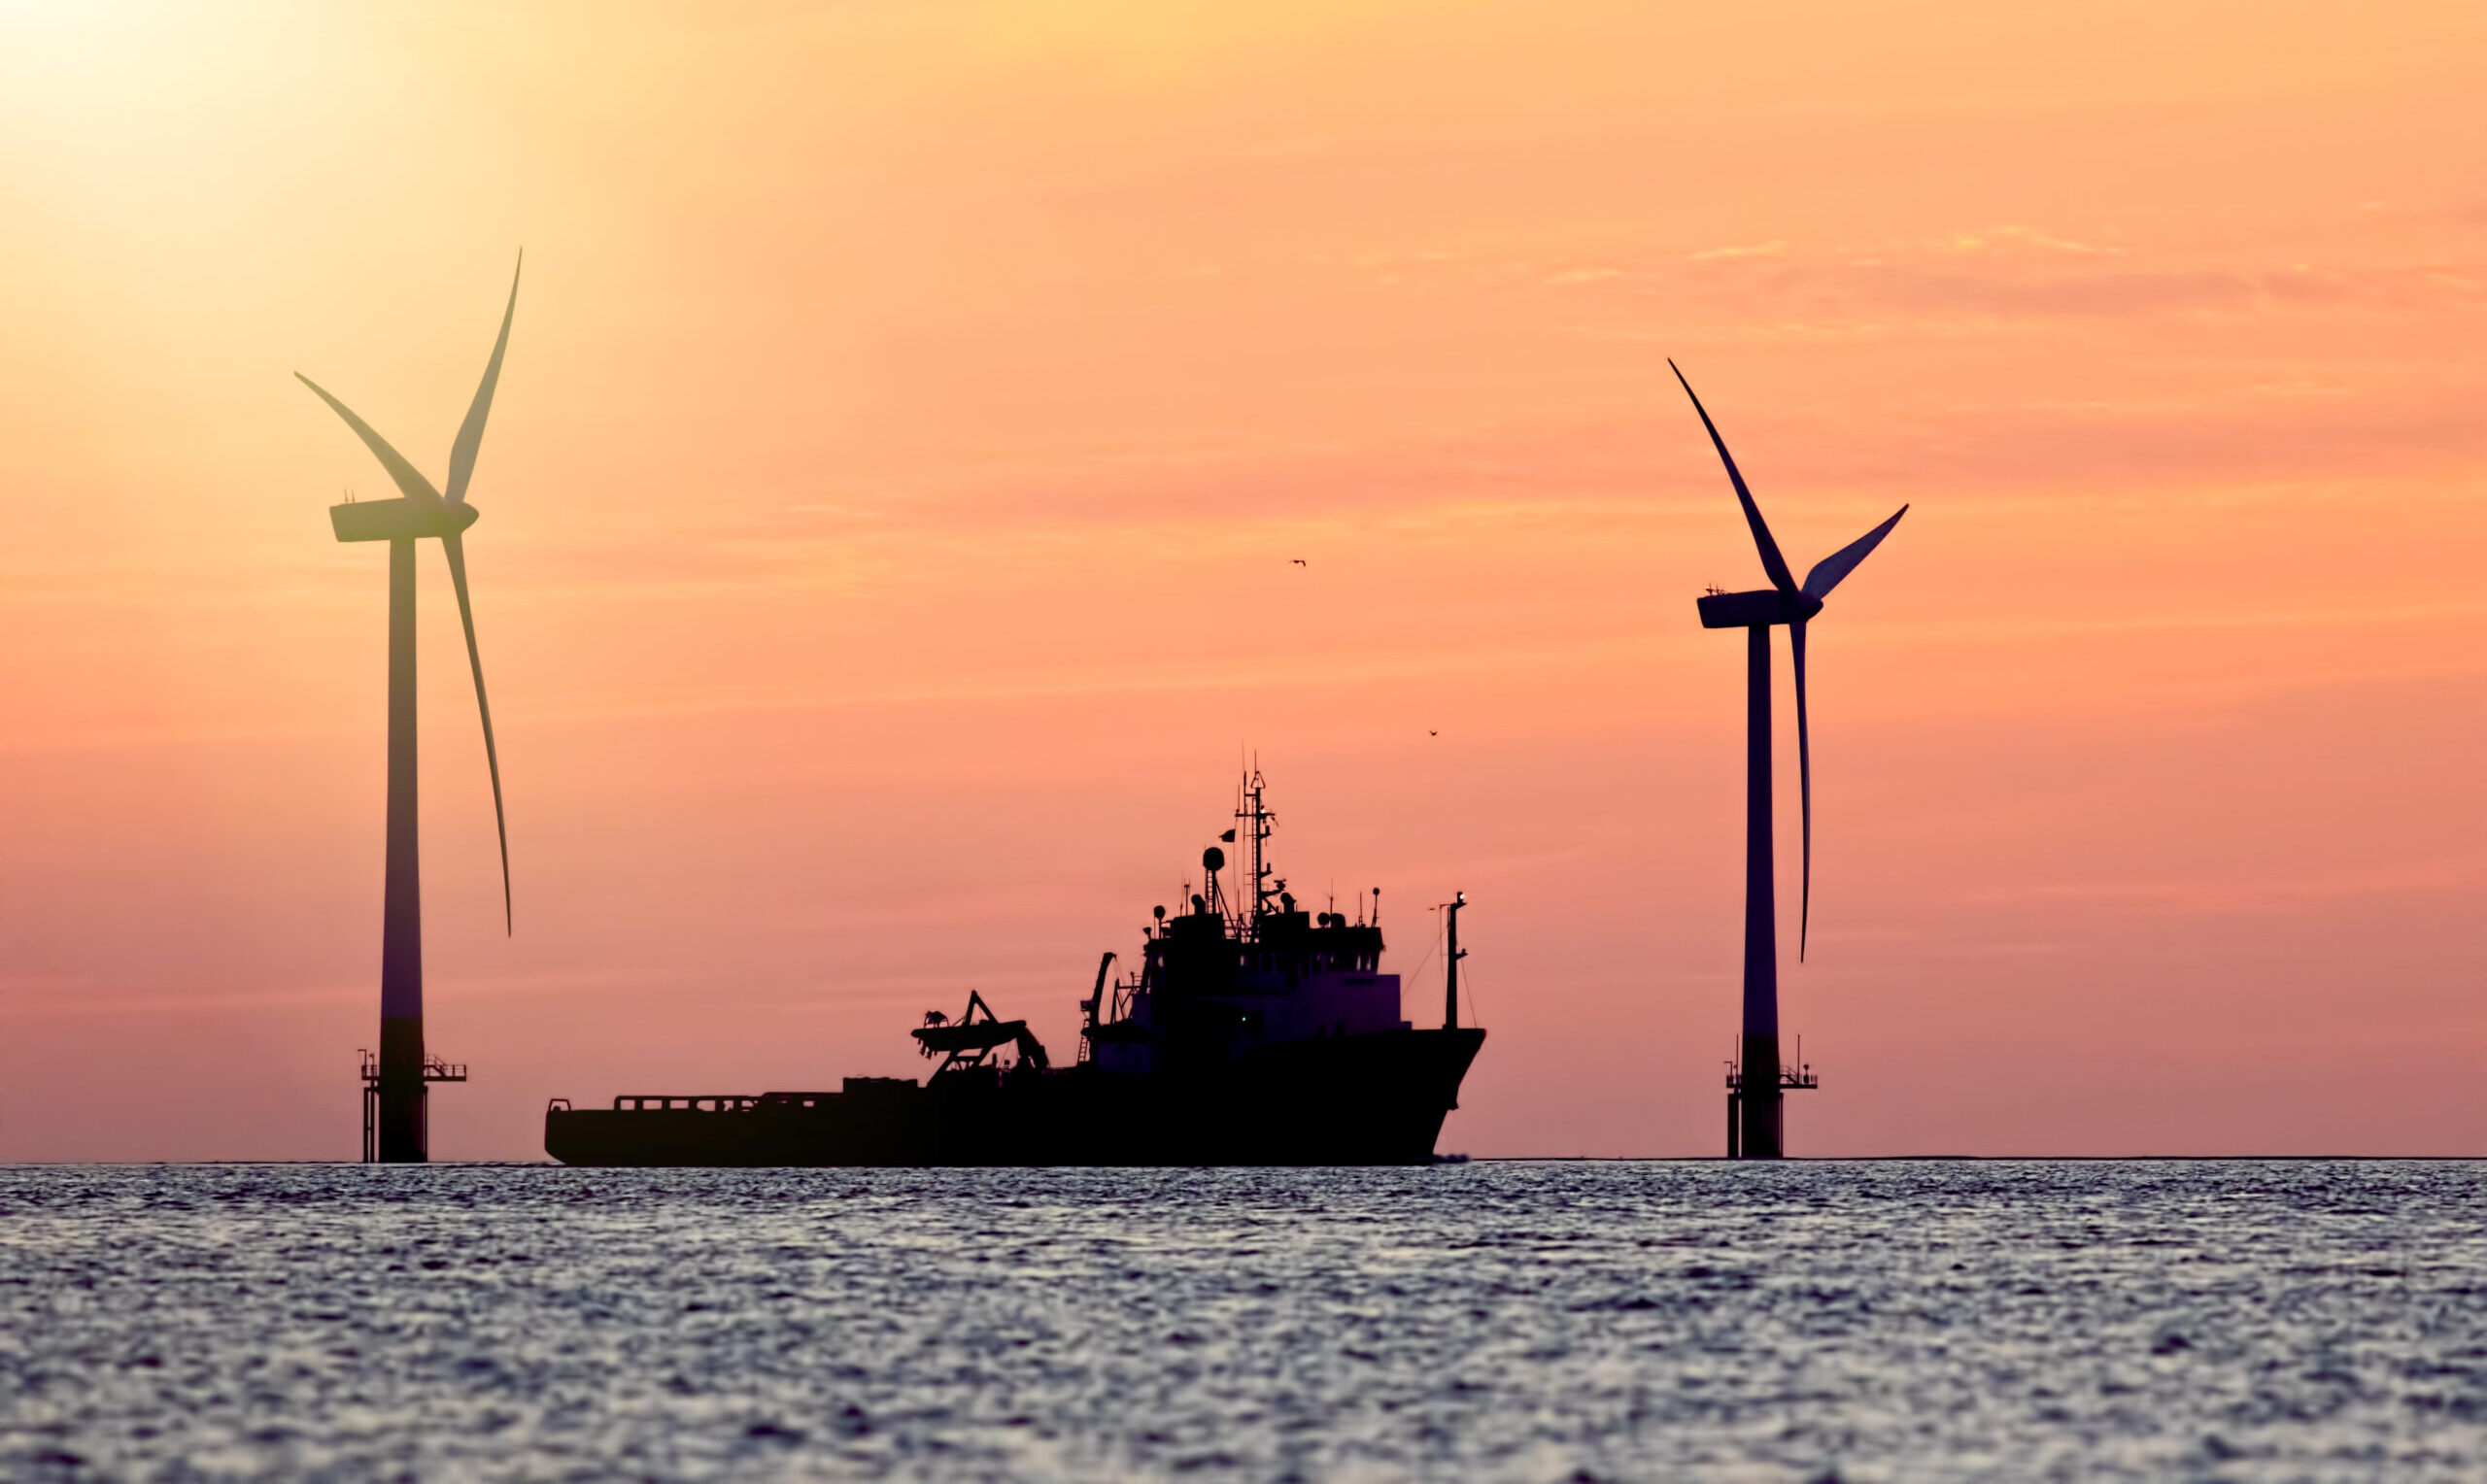 Sustainable resources. Wind farm with ship silhouette at tropical sunrise or sunset. Solar and wind energy and food supply represented in this tranquil image with copy space.